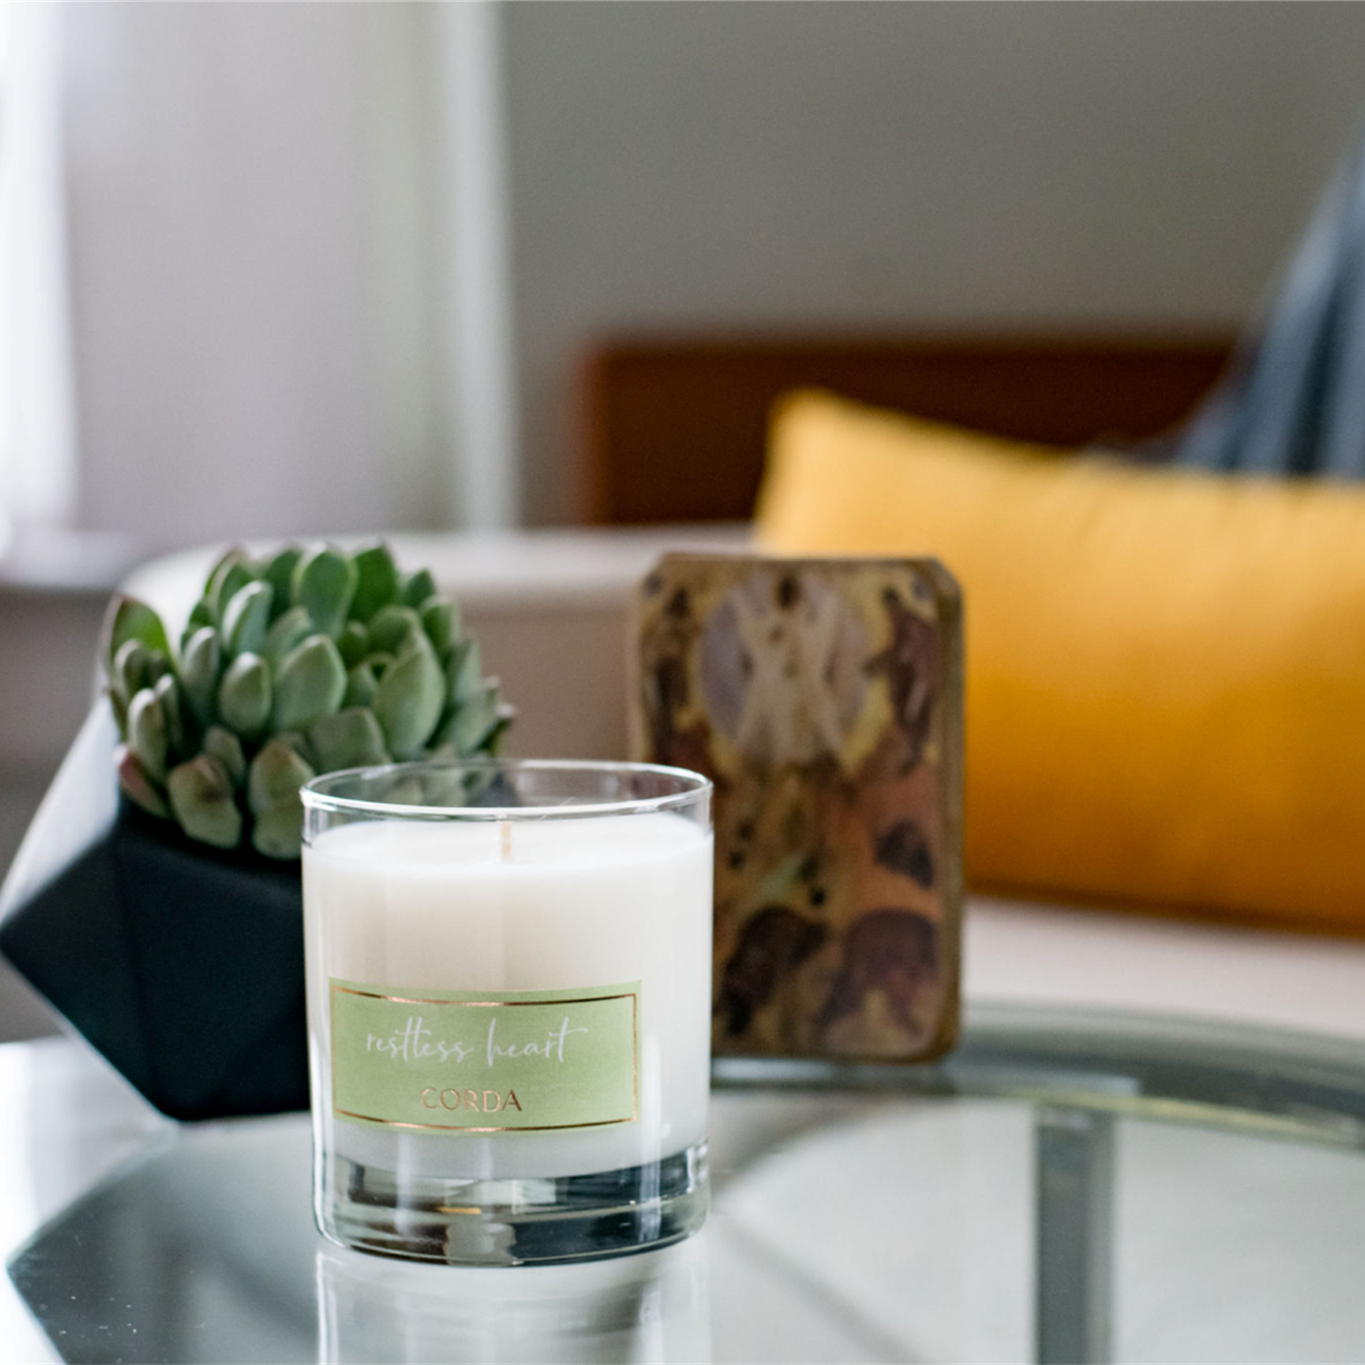 Restless Heart Candle